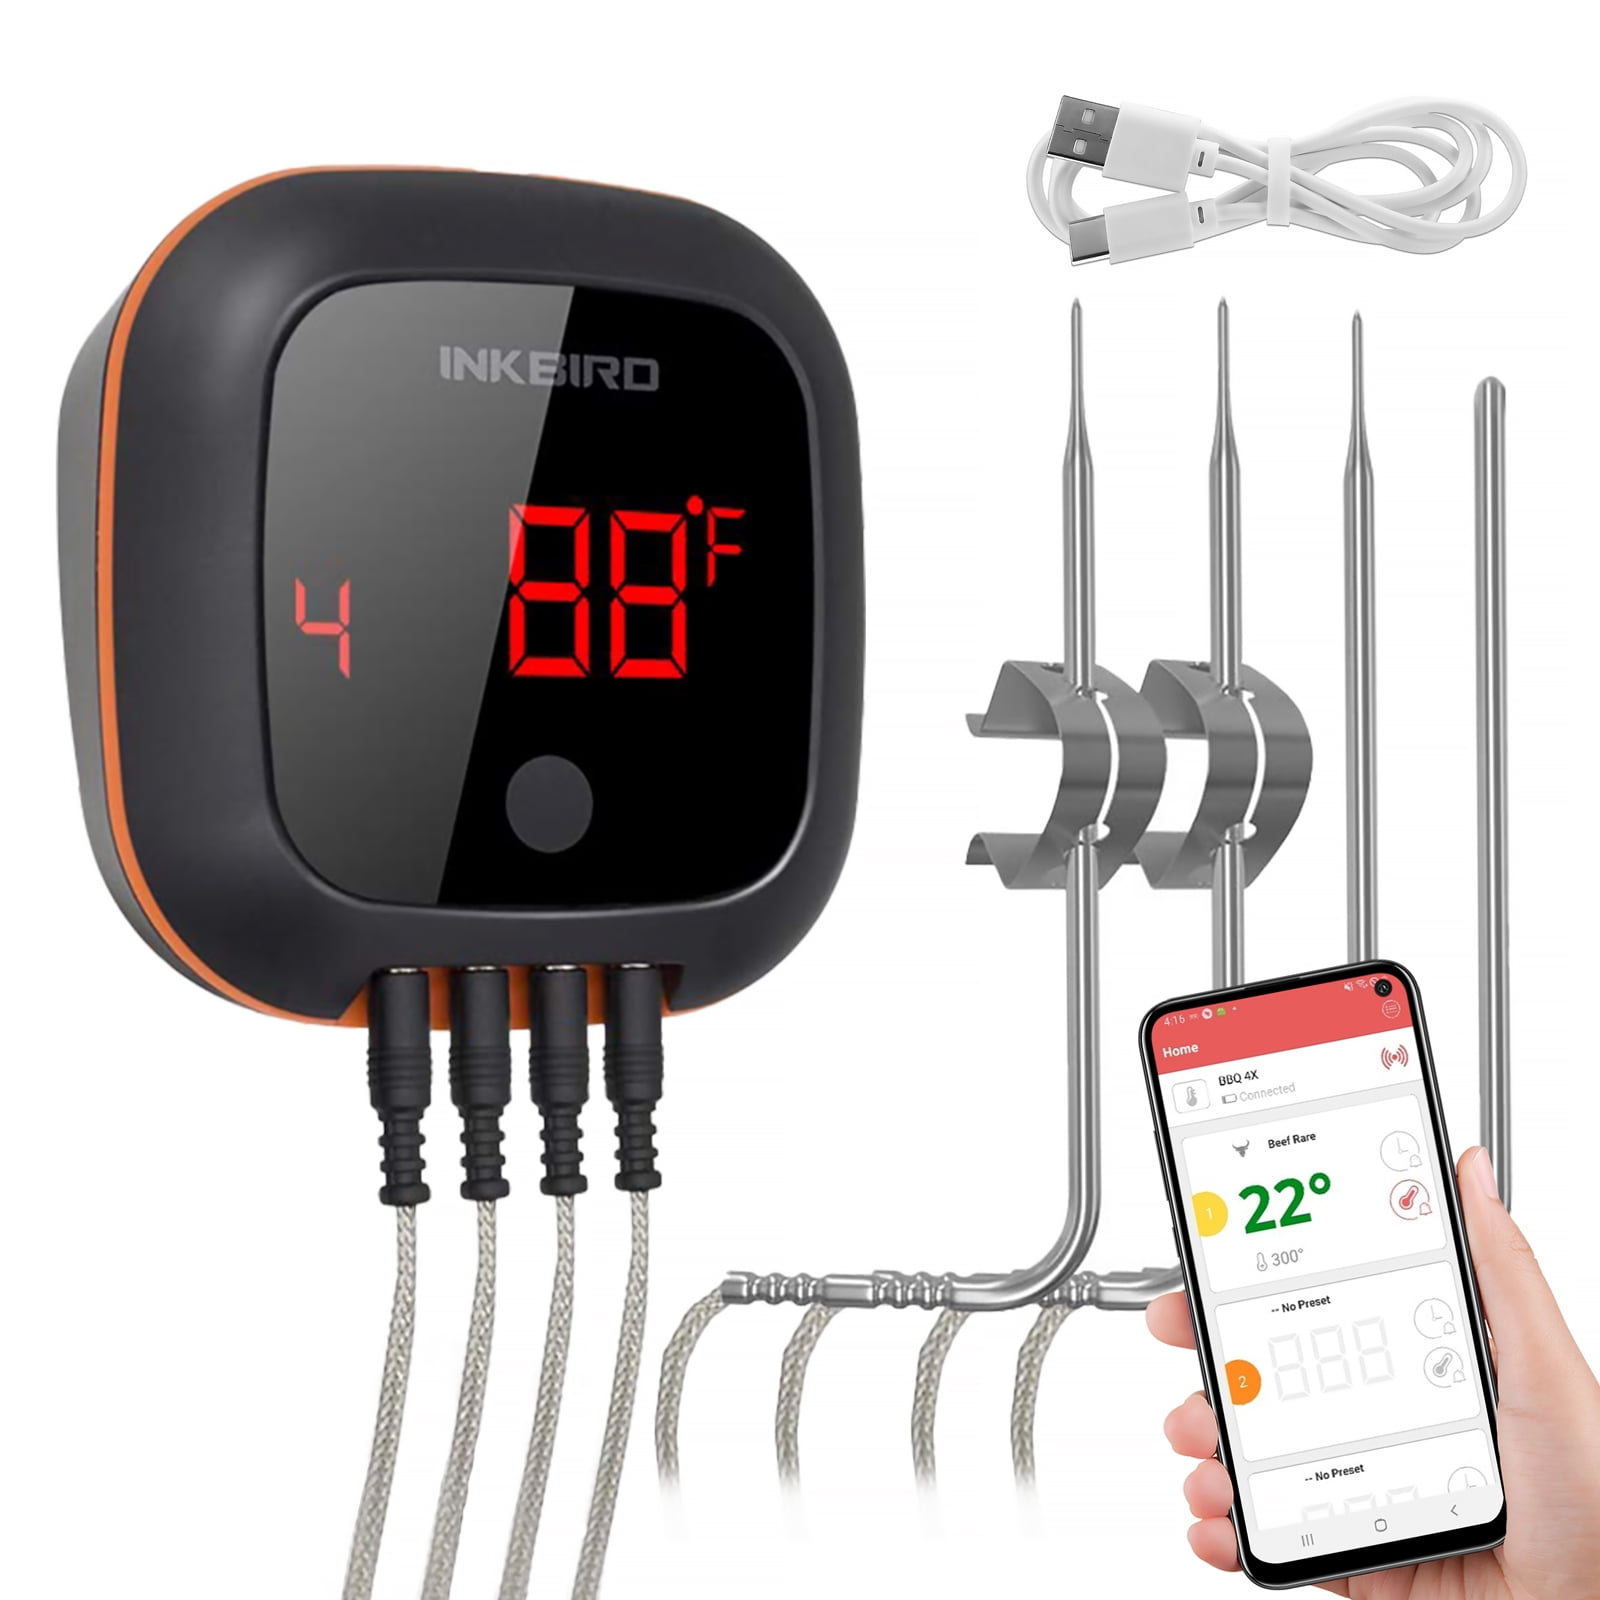 Inkbird Bluetooth Grill BBQ Meat Thermometer with 4 Probes Digital Wireless Grill Thermometer, IBT-4XS, Timer, Alarm,150 ft Cooking Kitchen Food Meat Thermometer for Smoker, Oven, Drum - Walmart.com